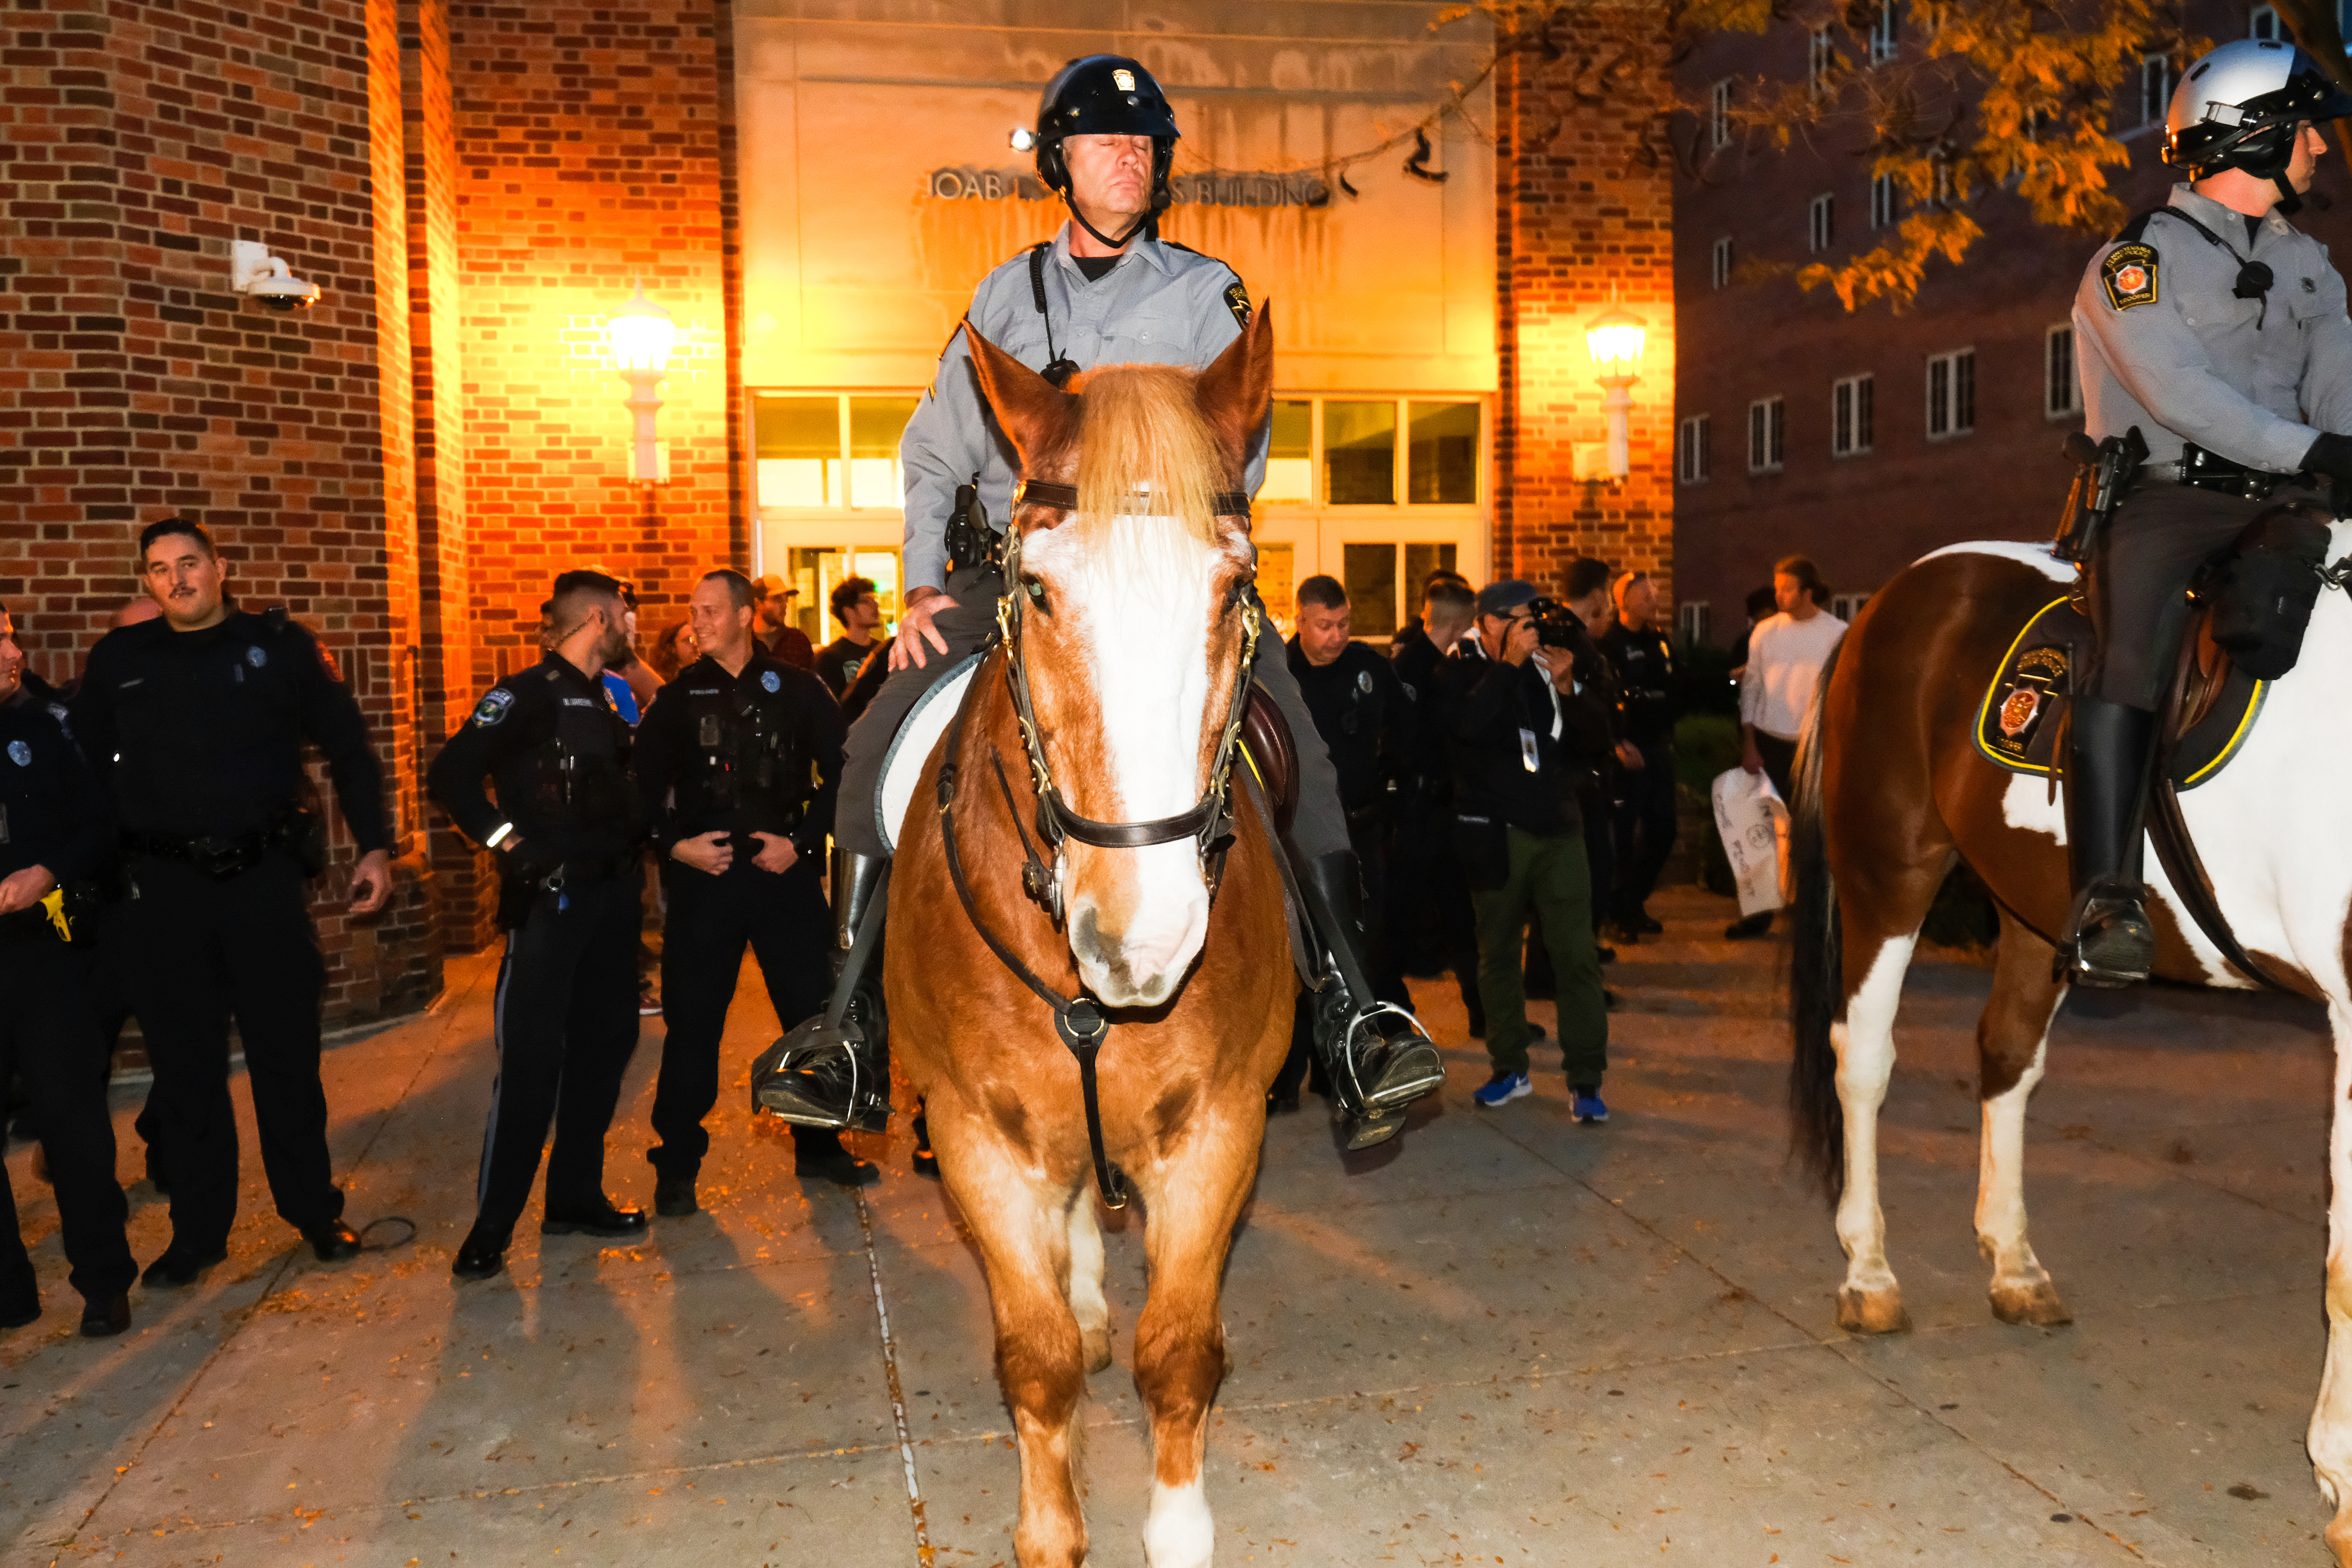 Penn State deployed officers on horseback to control the crowds of student protesters. Photo by Tess Owen